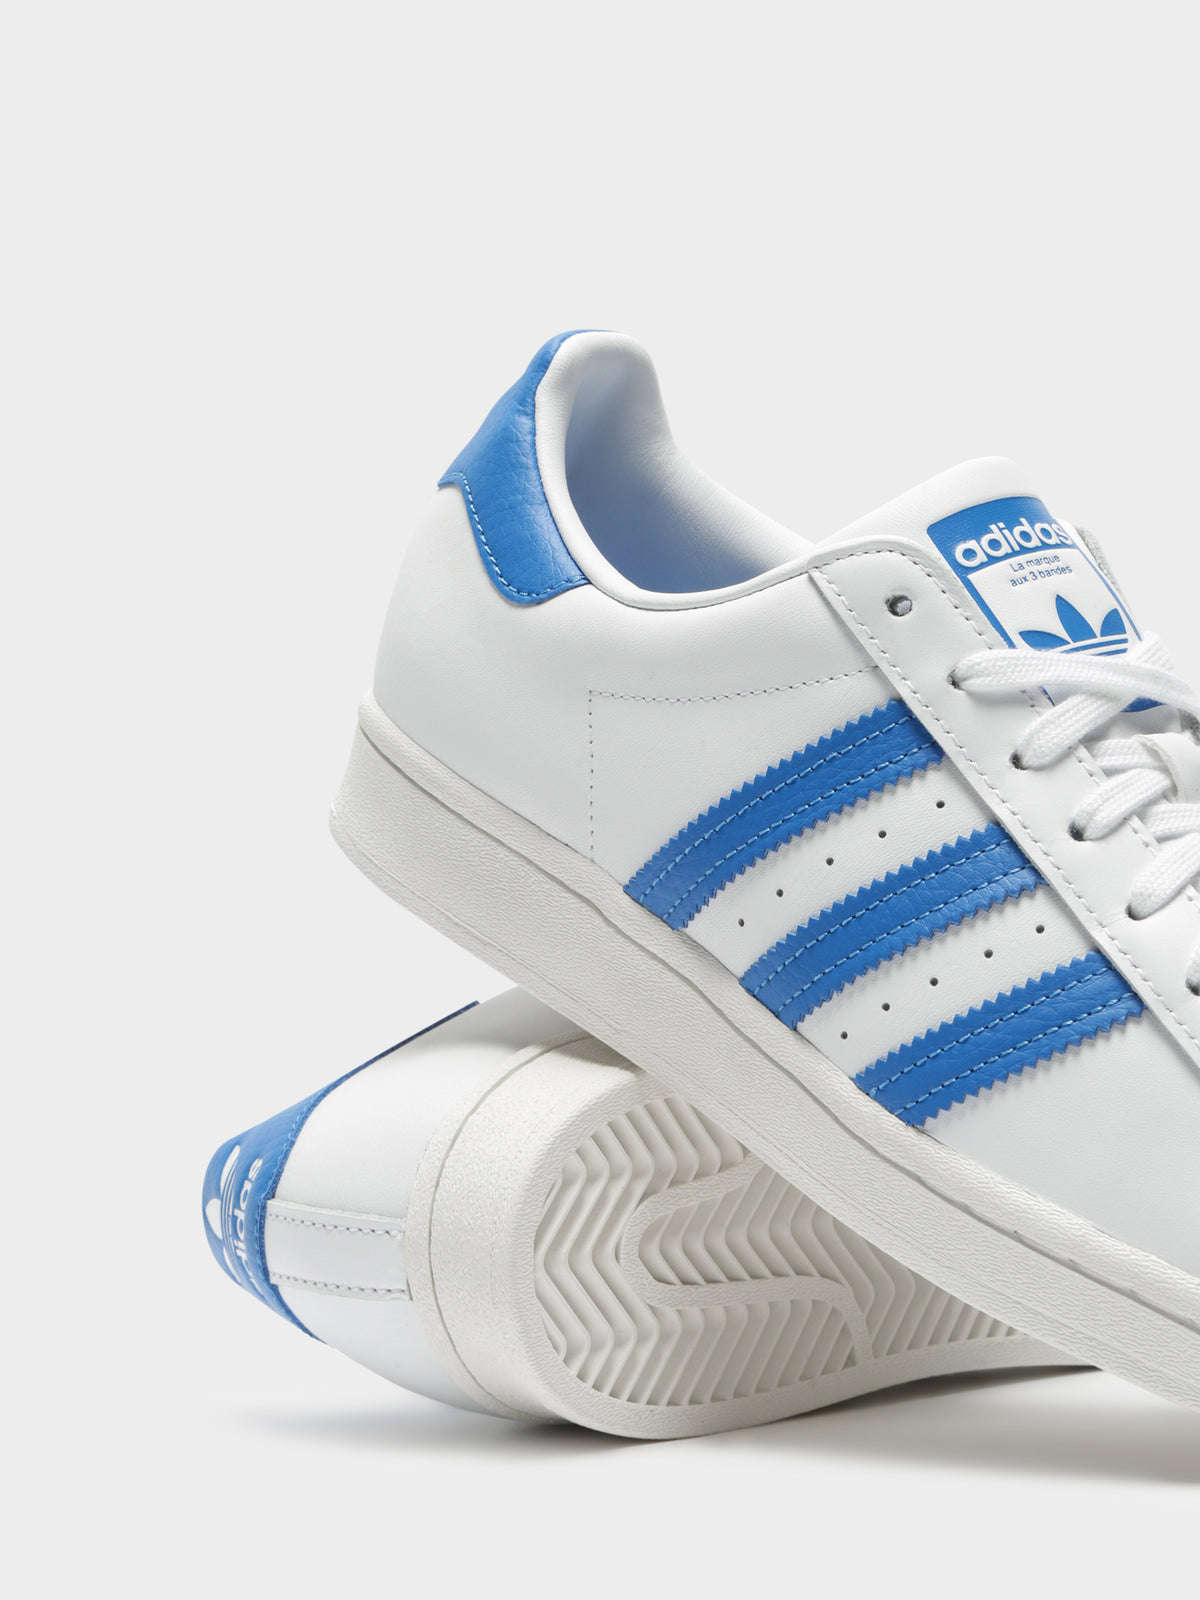 Unisex Superstar Sneakers in White and Blue